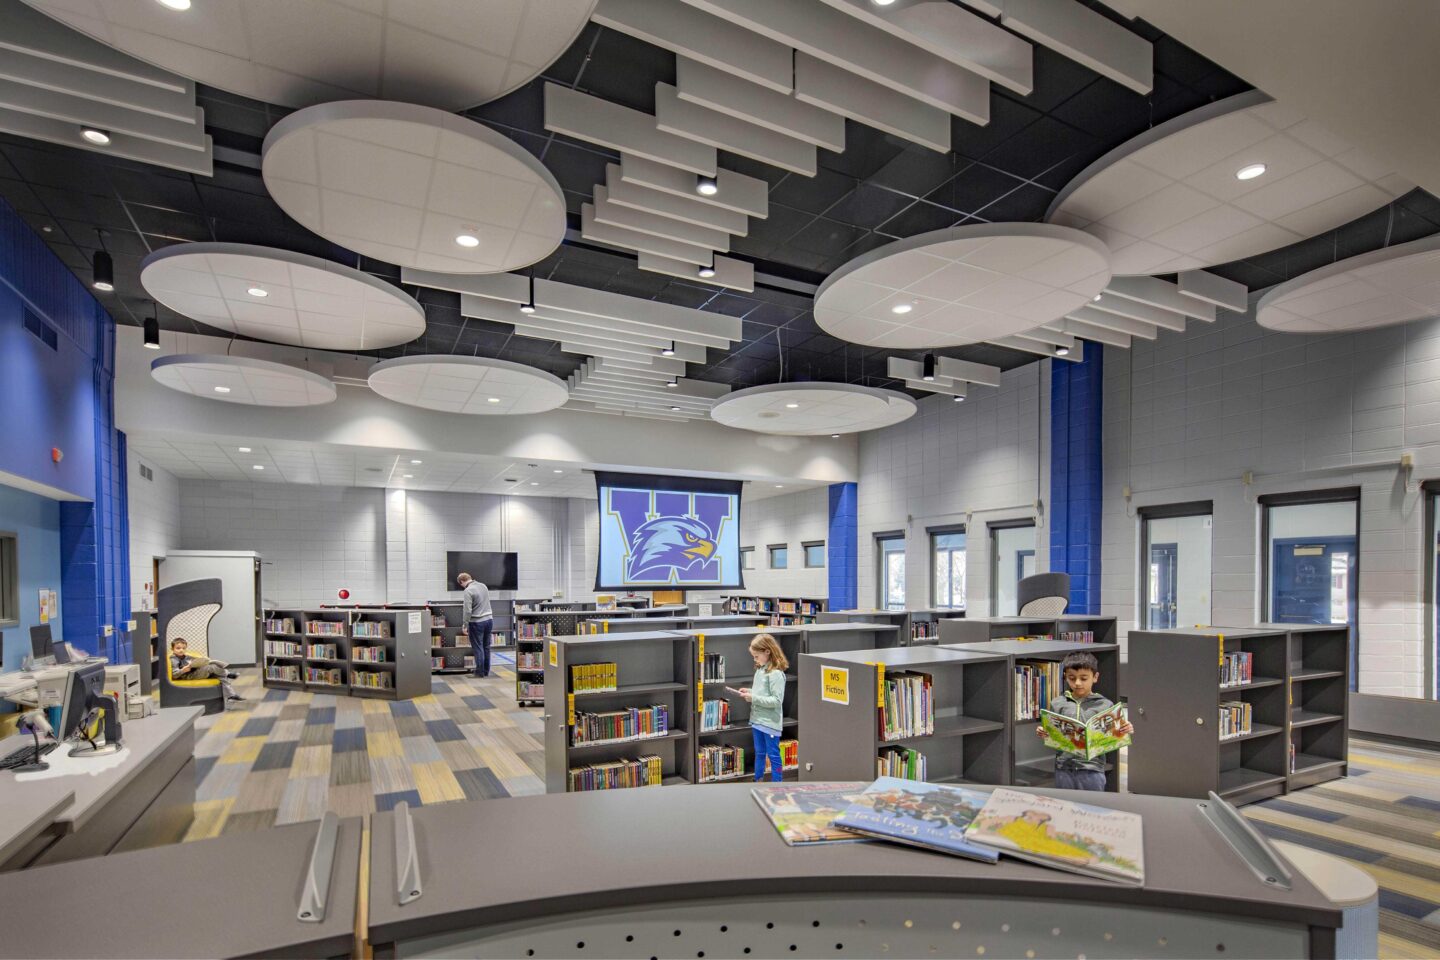 Geometric panels float high above a library with low shelves, as students browse books at Wheatland Center School